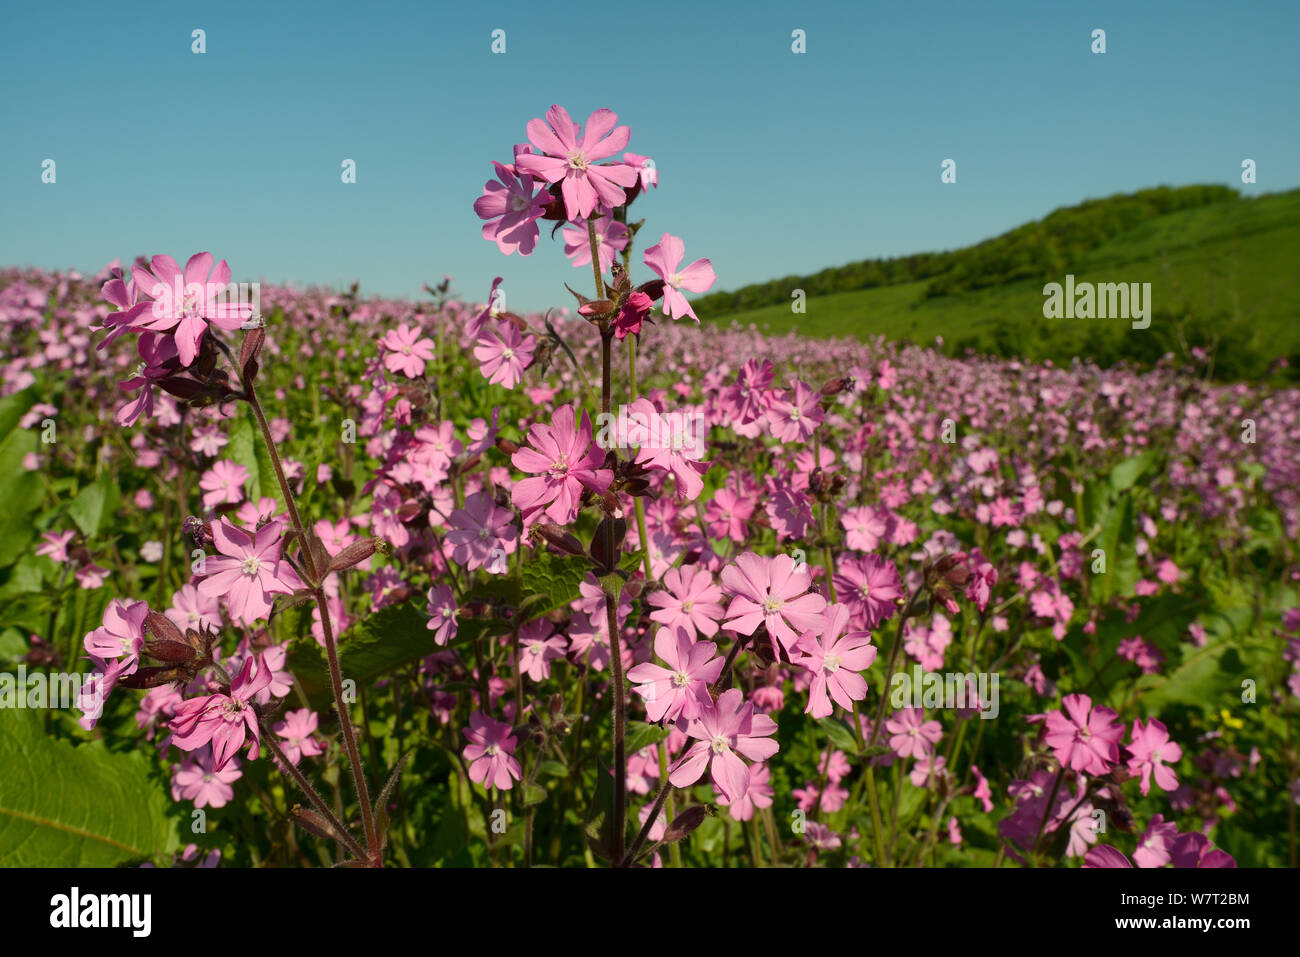 Red campion (Silene dioica) flowering in a pollen and nectar flower patch in farmland, Marlborough Downs, Wiltshire, UK, June. Stock Photo